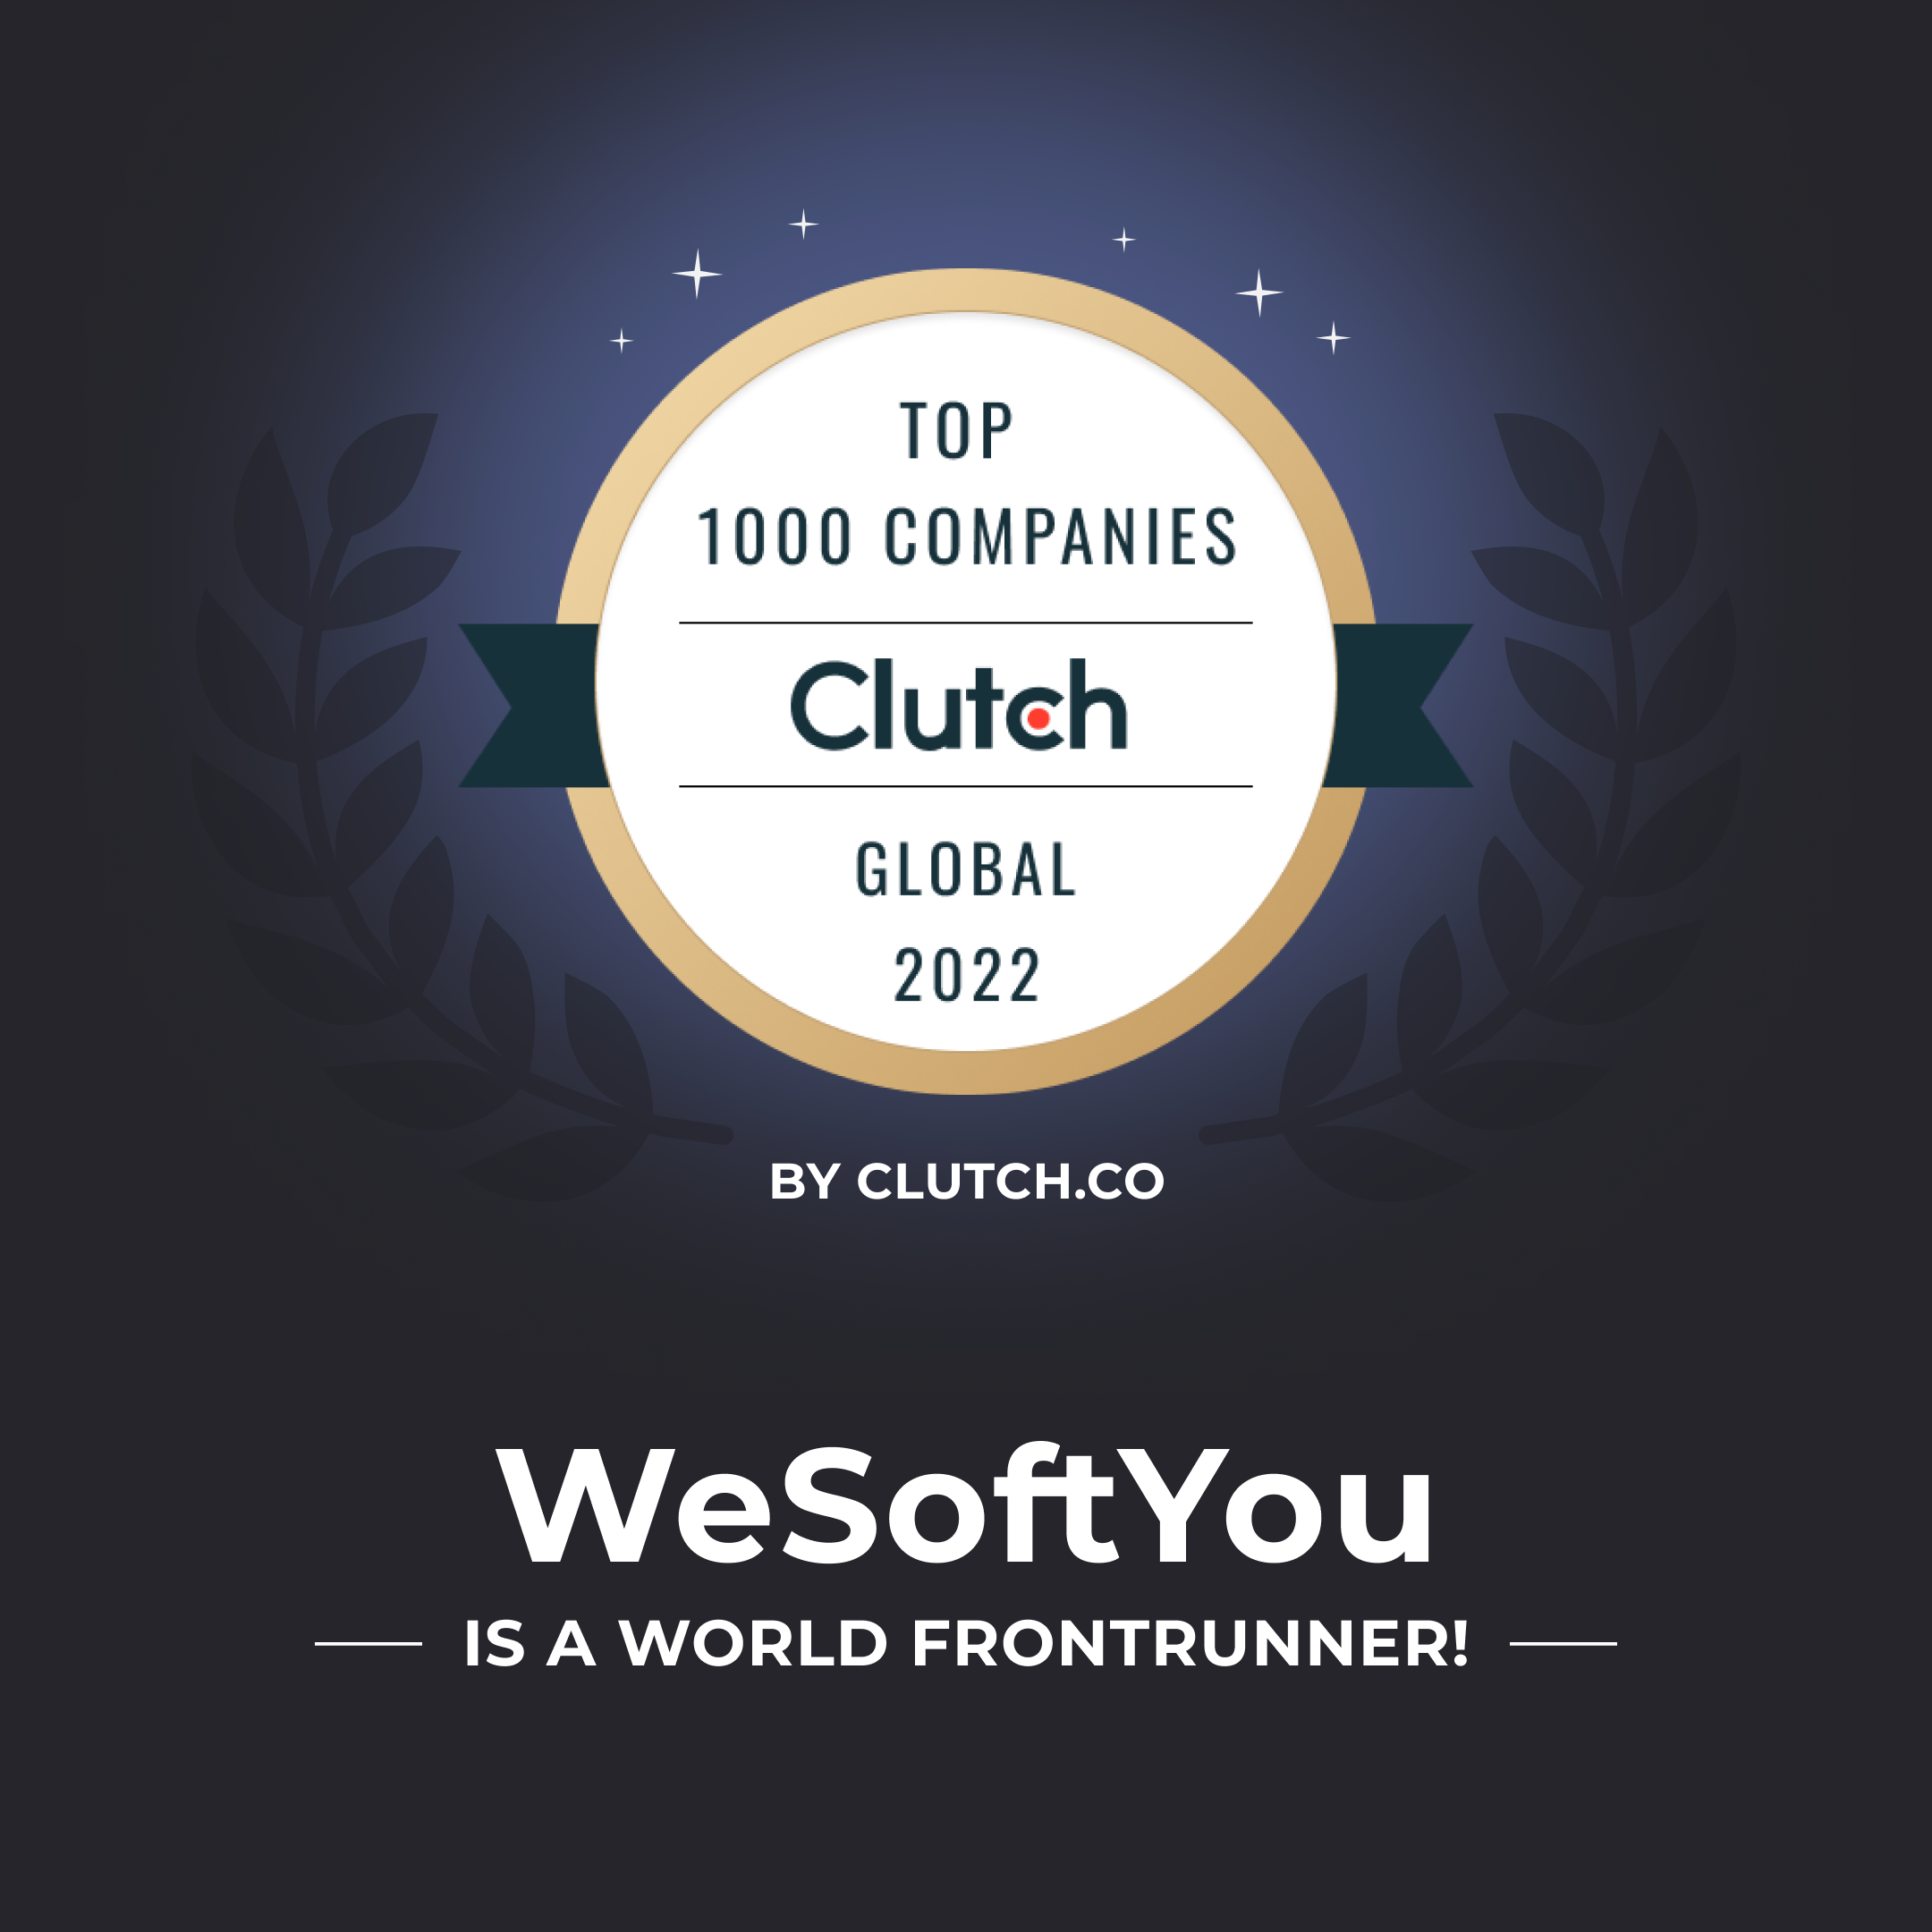 WSU is a world Frontrunner – Top 1% in the world by Clutch, image #6